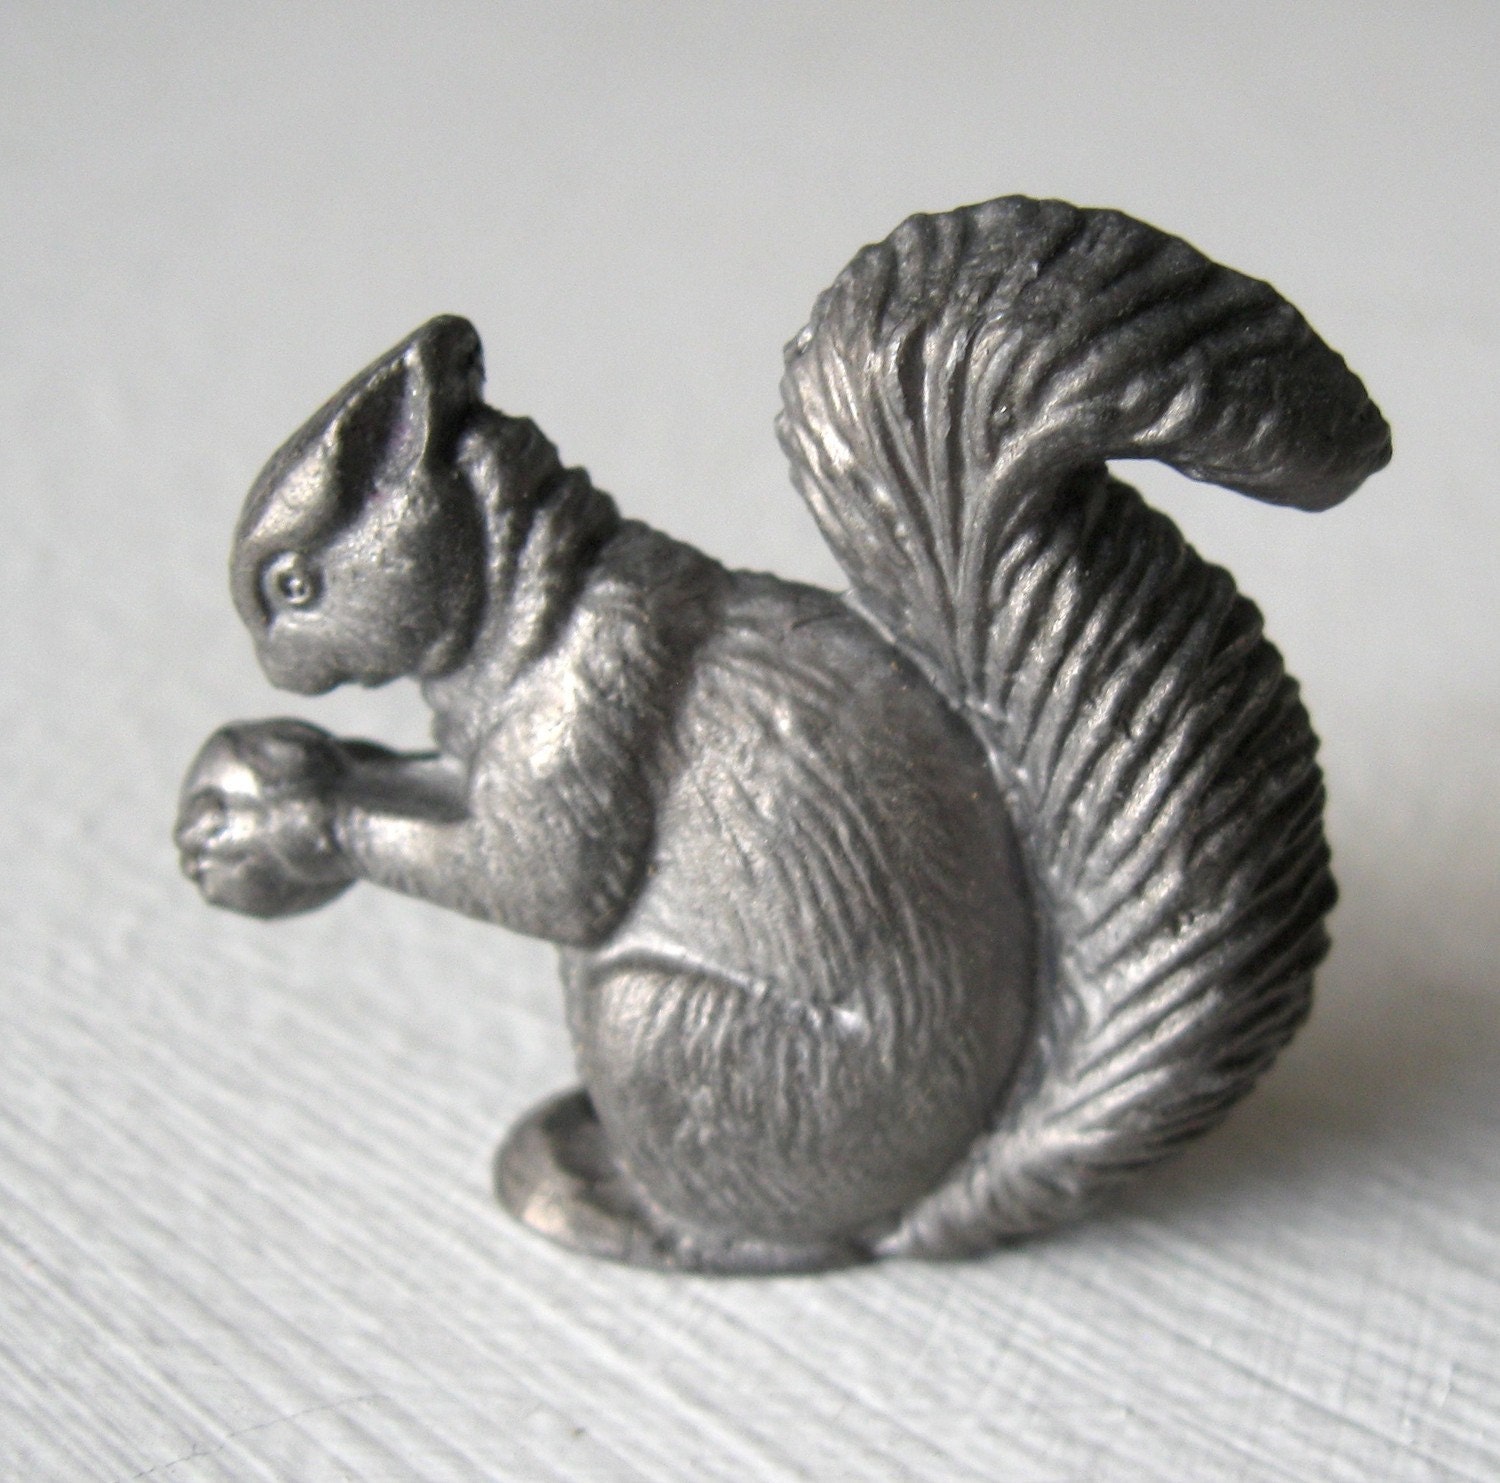 Two Nutty Squirrels Miniature Pewter Figurines by Vivavivant